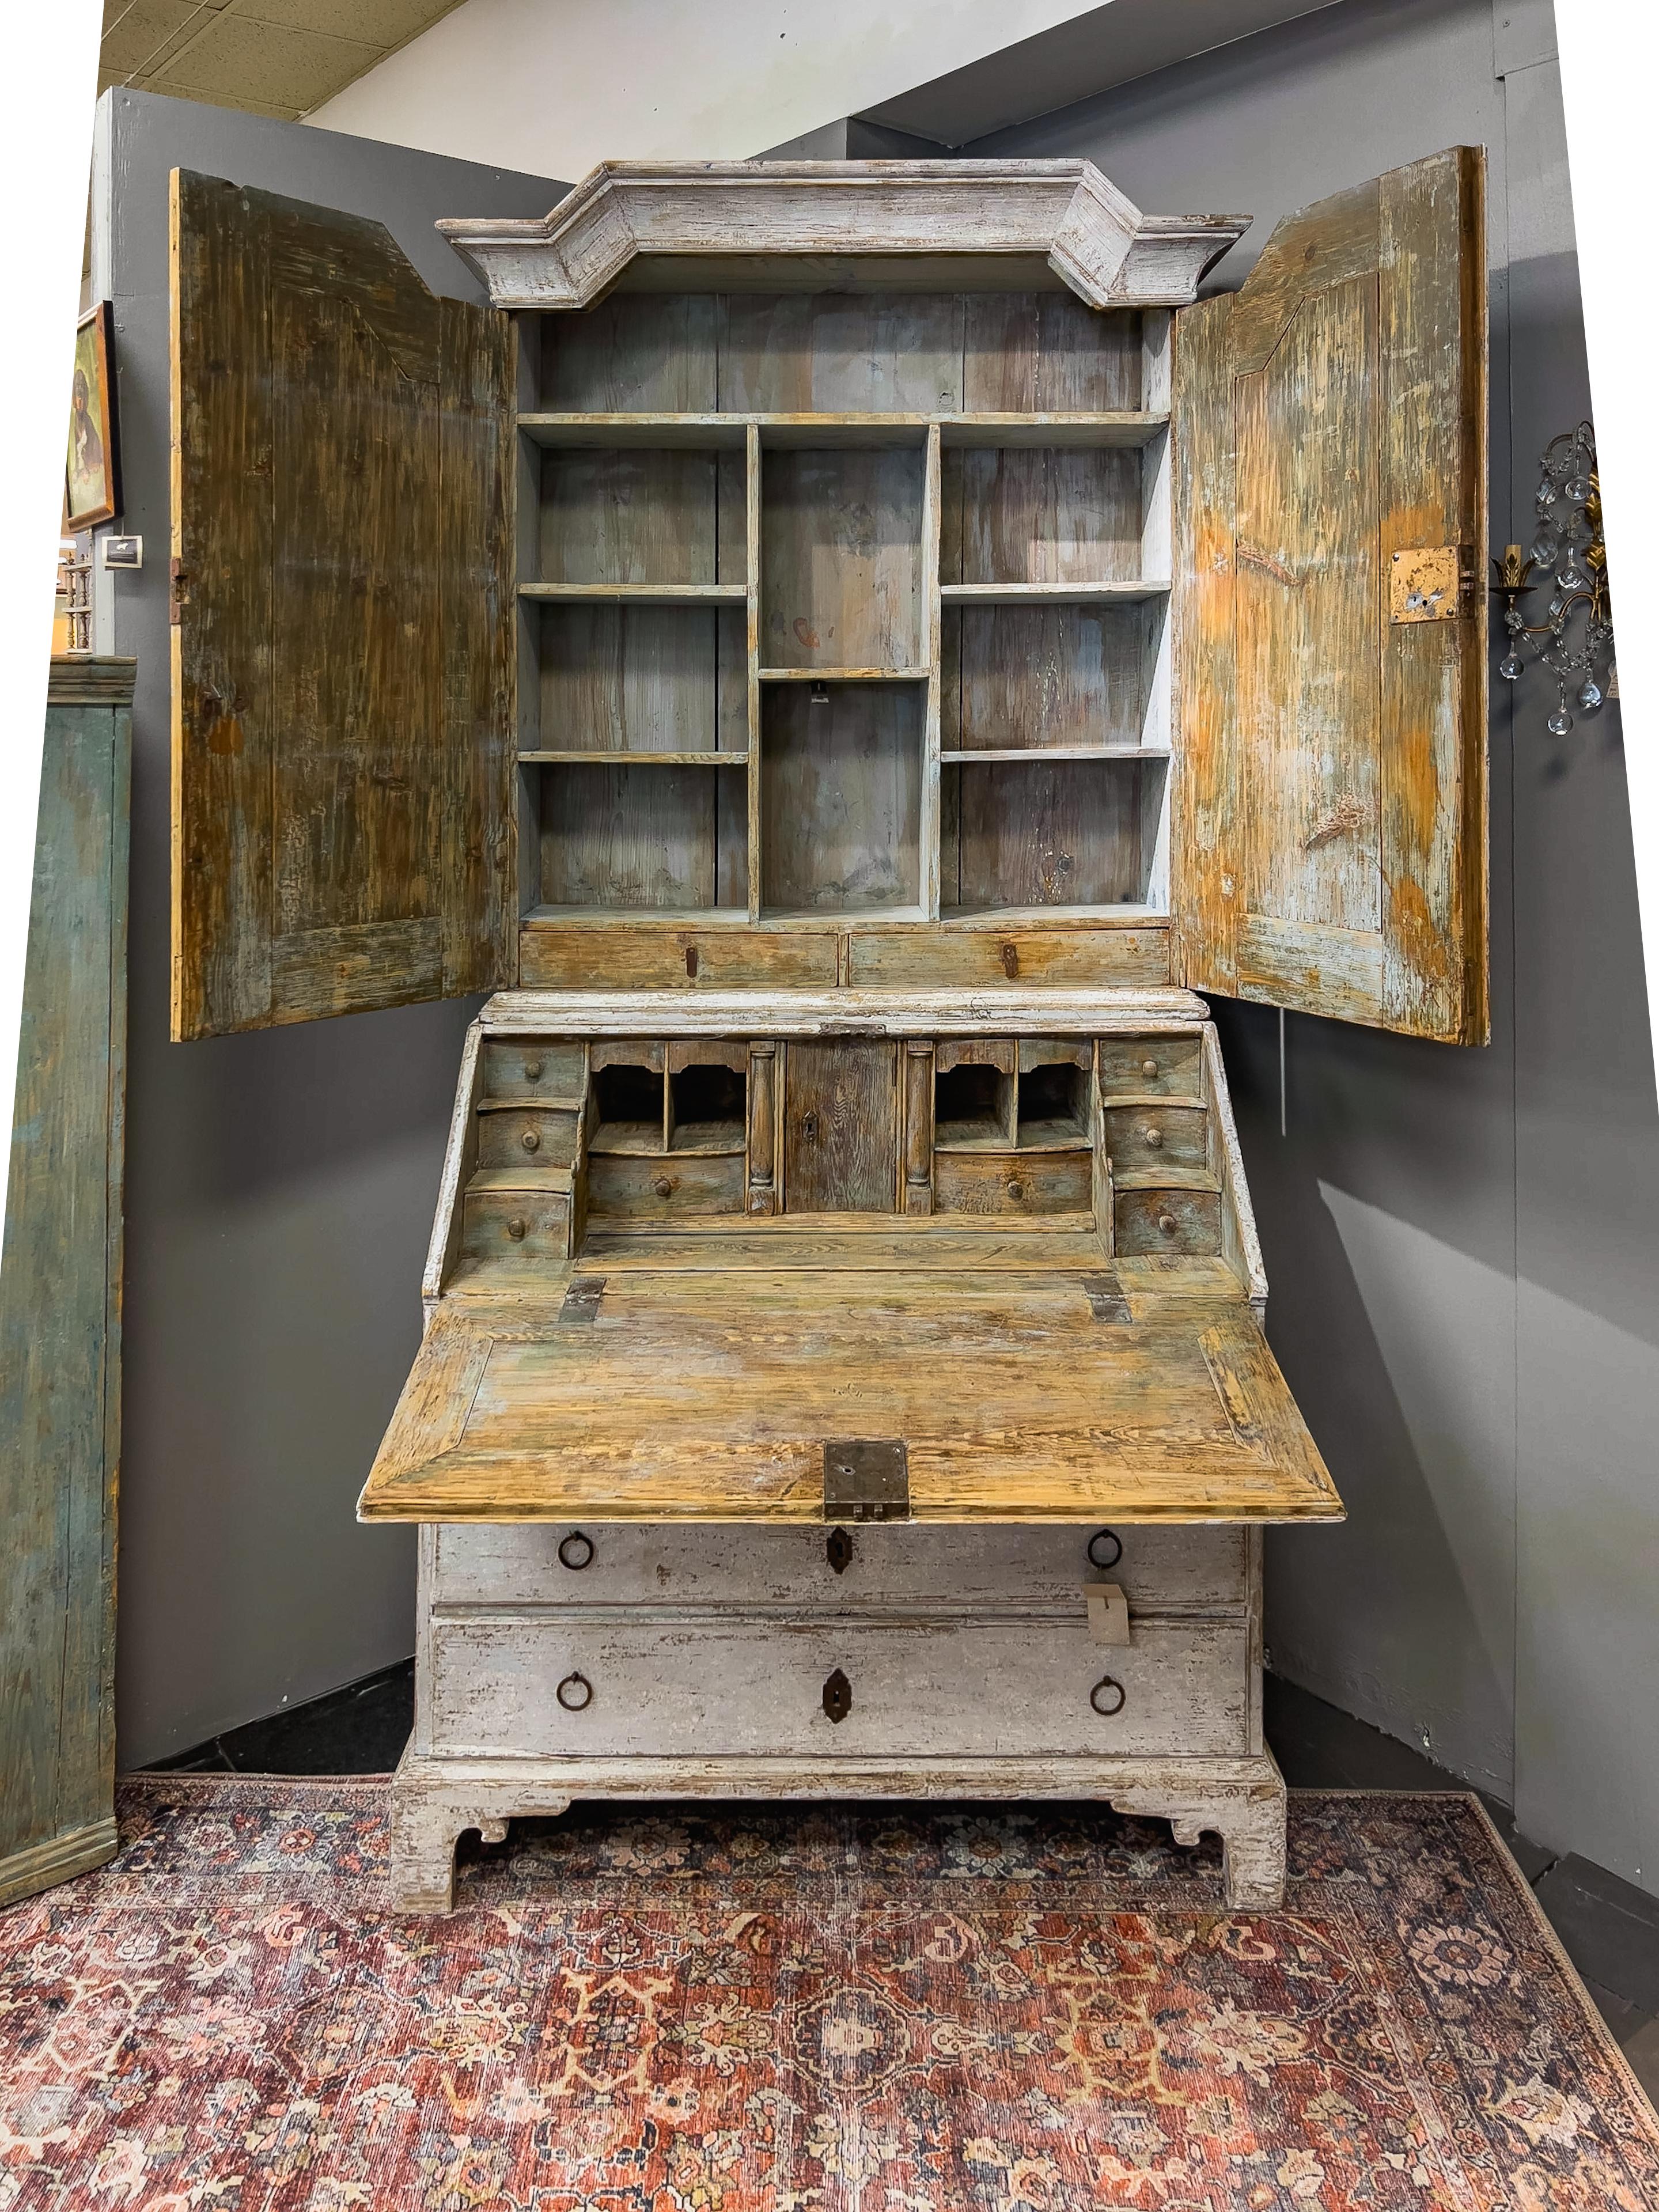 18th c. Swedish Secretary with Painted Finish having two upper doors above the fall front secretary desk and 4 bottom drawers. The interior of the upper and lower section have multiple drawers, some obvious and some concealed. 

See video and